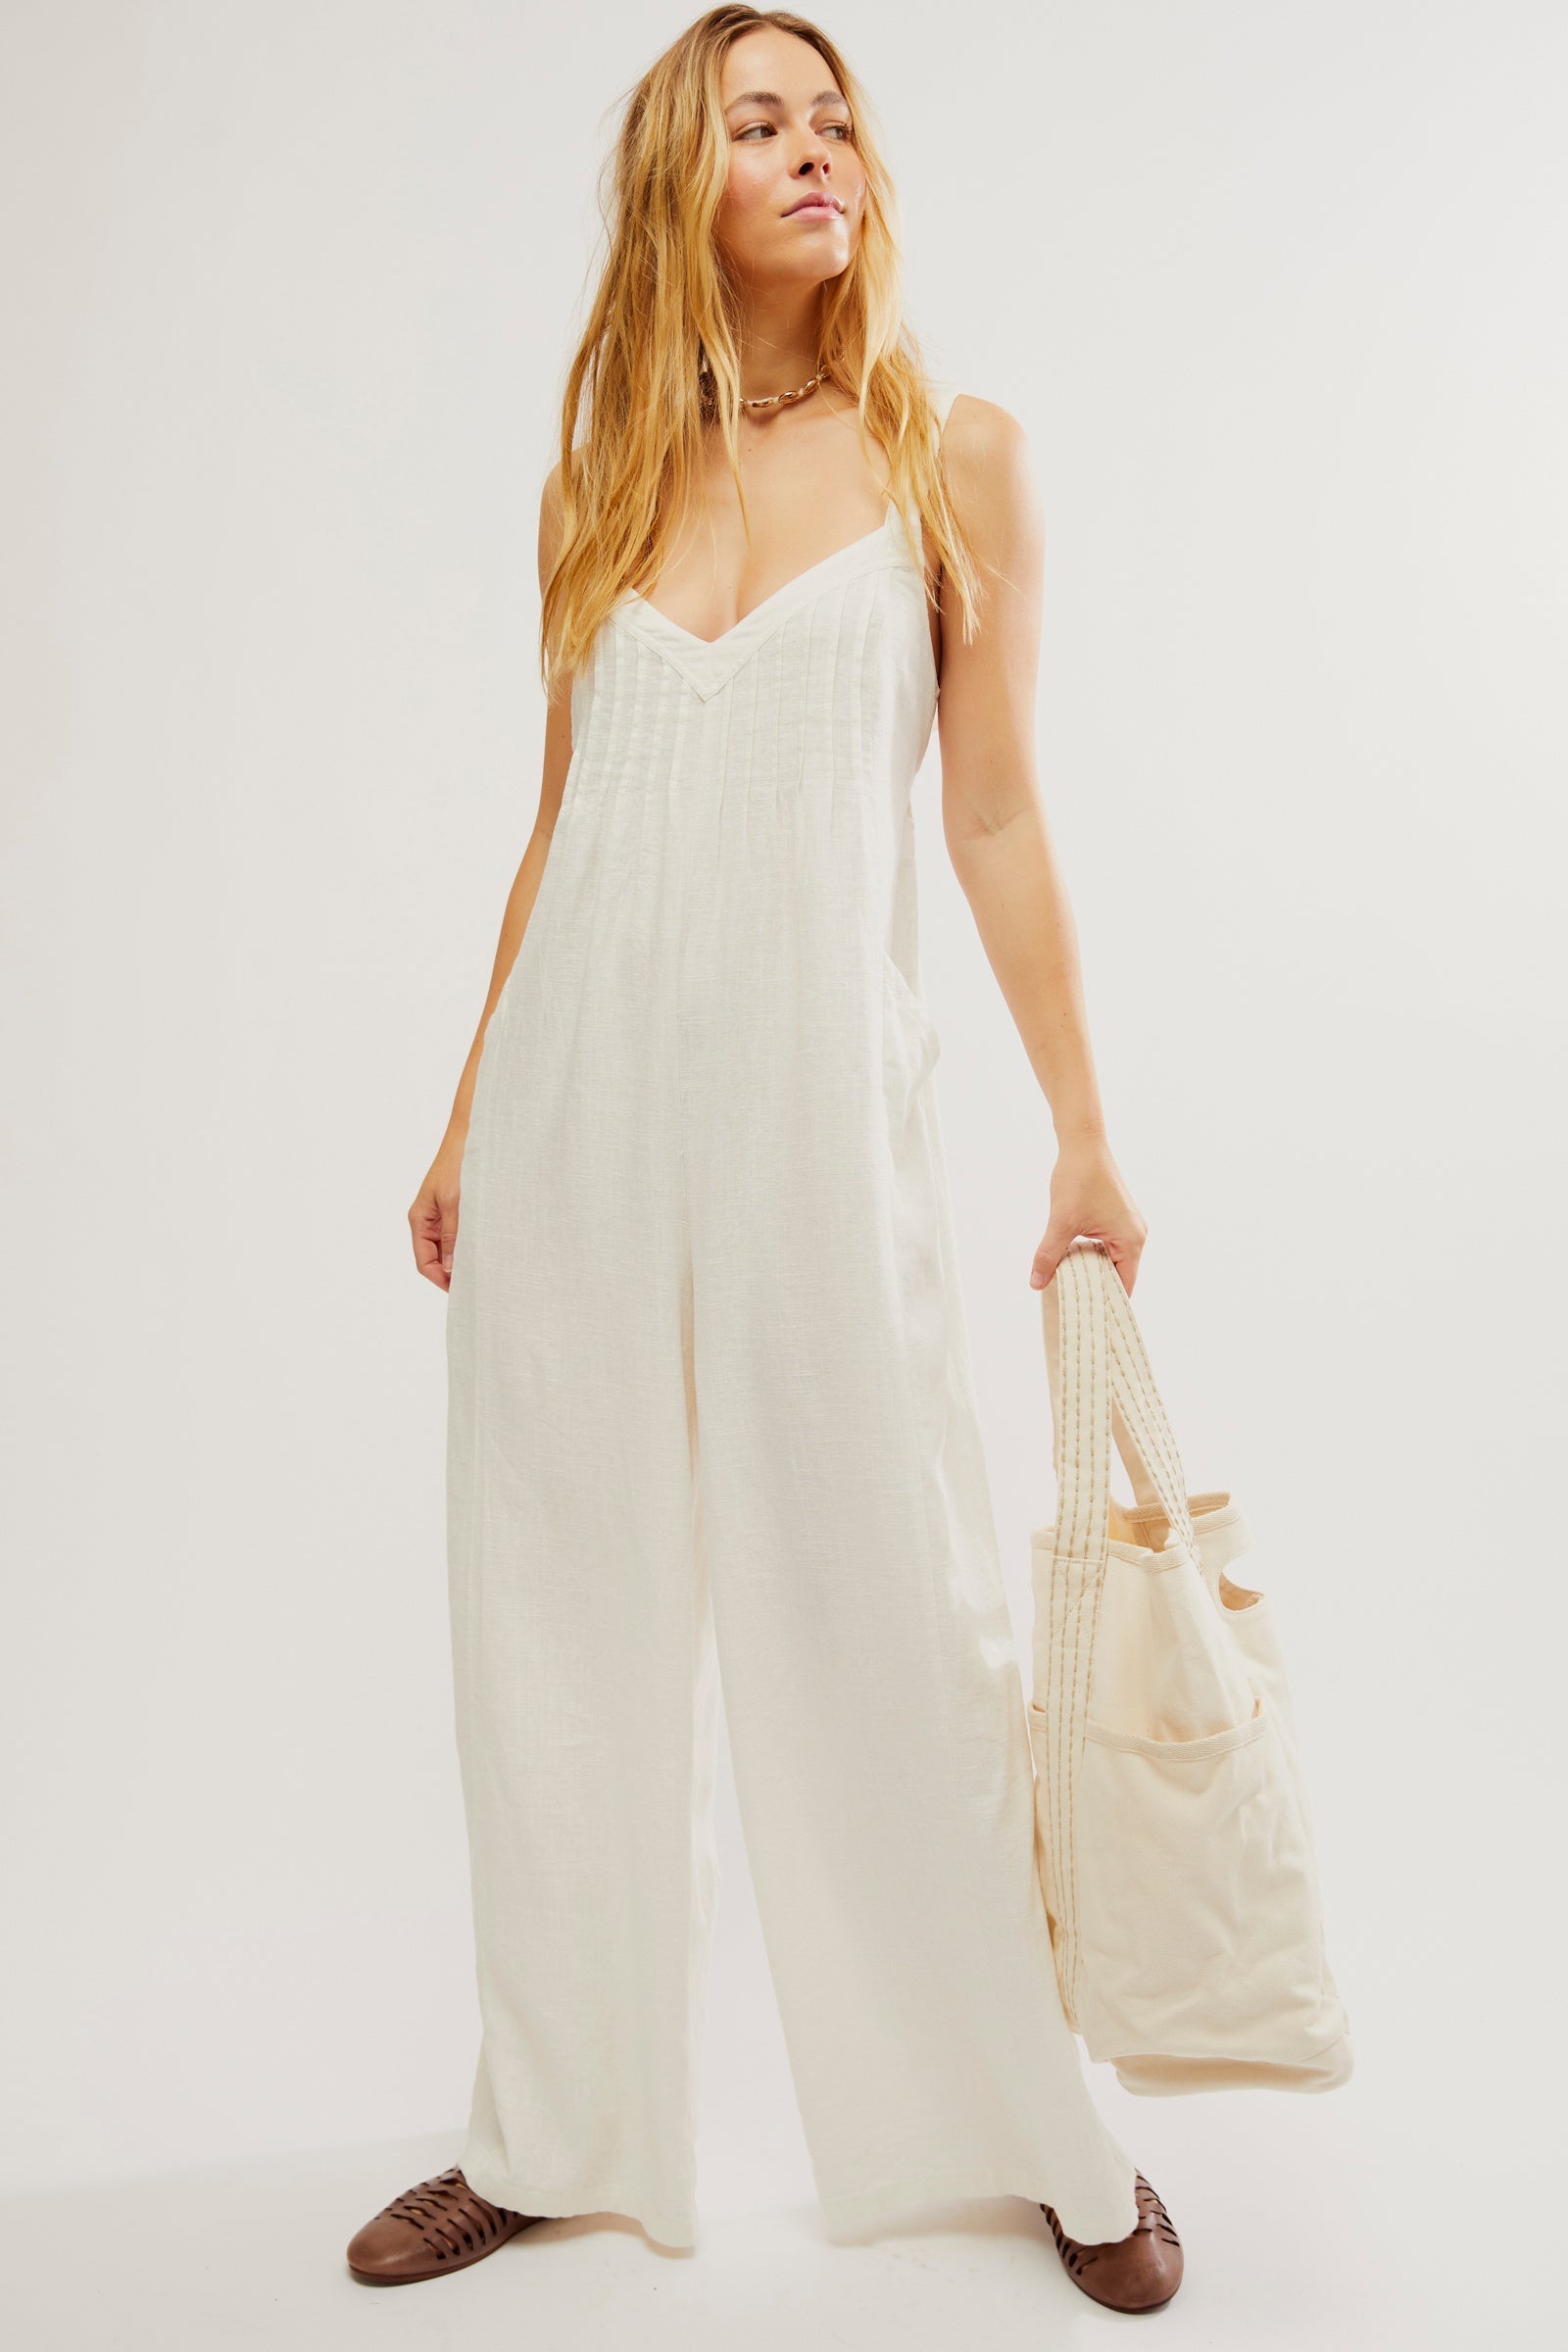 Drifting Dreams One-Piece | Free People